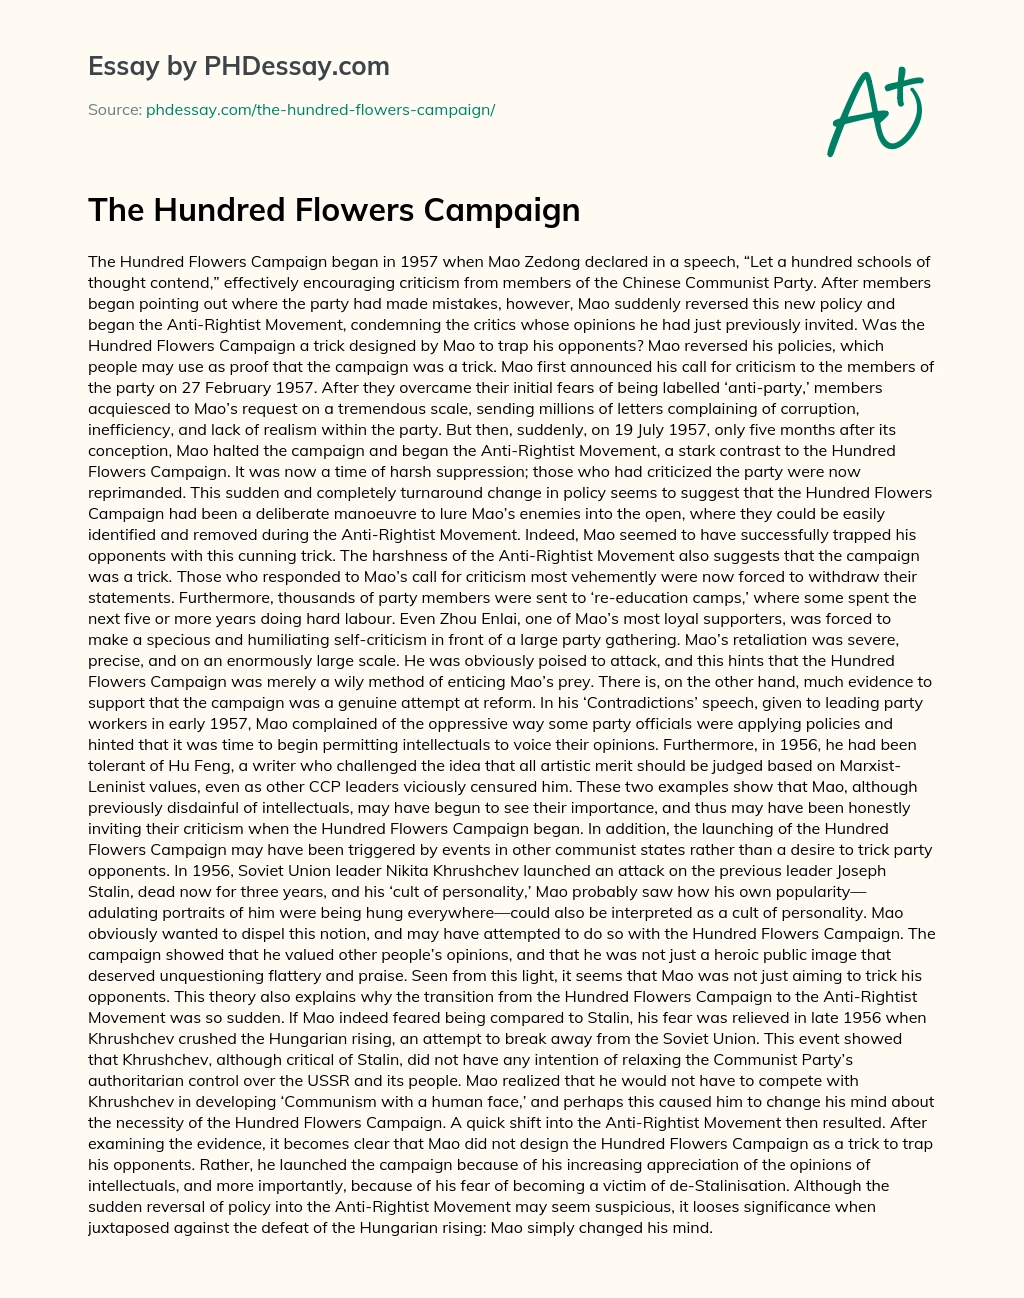 The Hundred Flowers Campaign essay